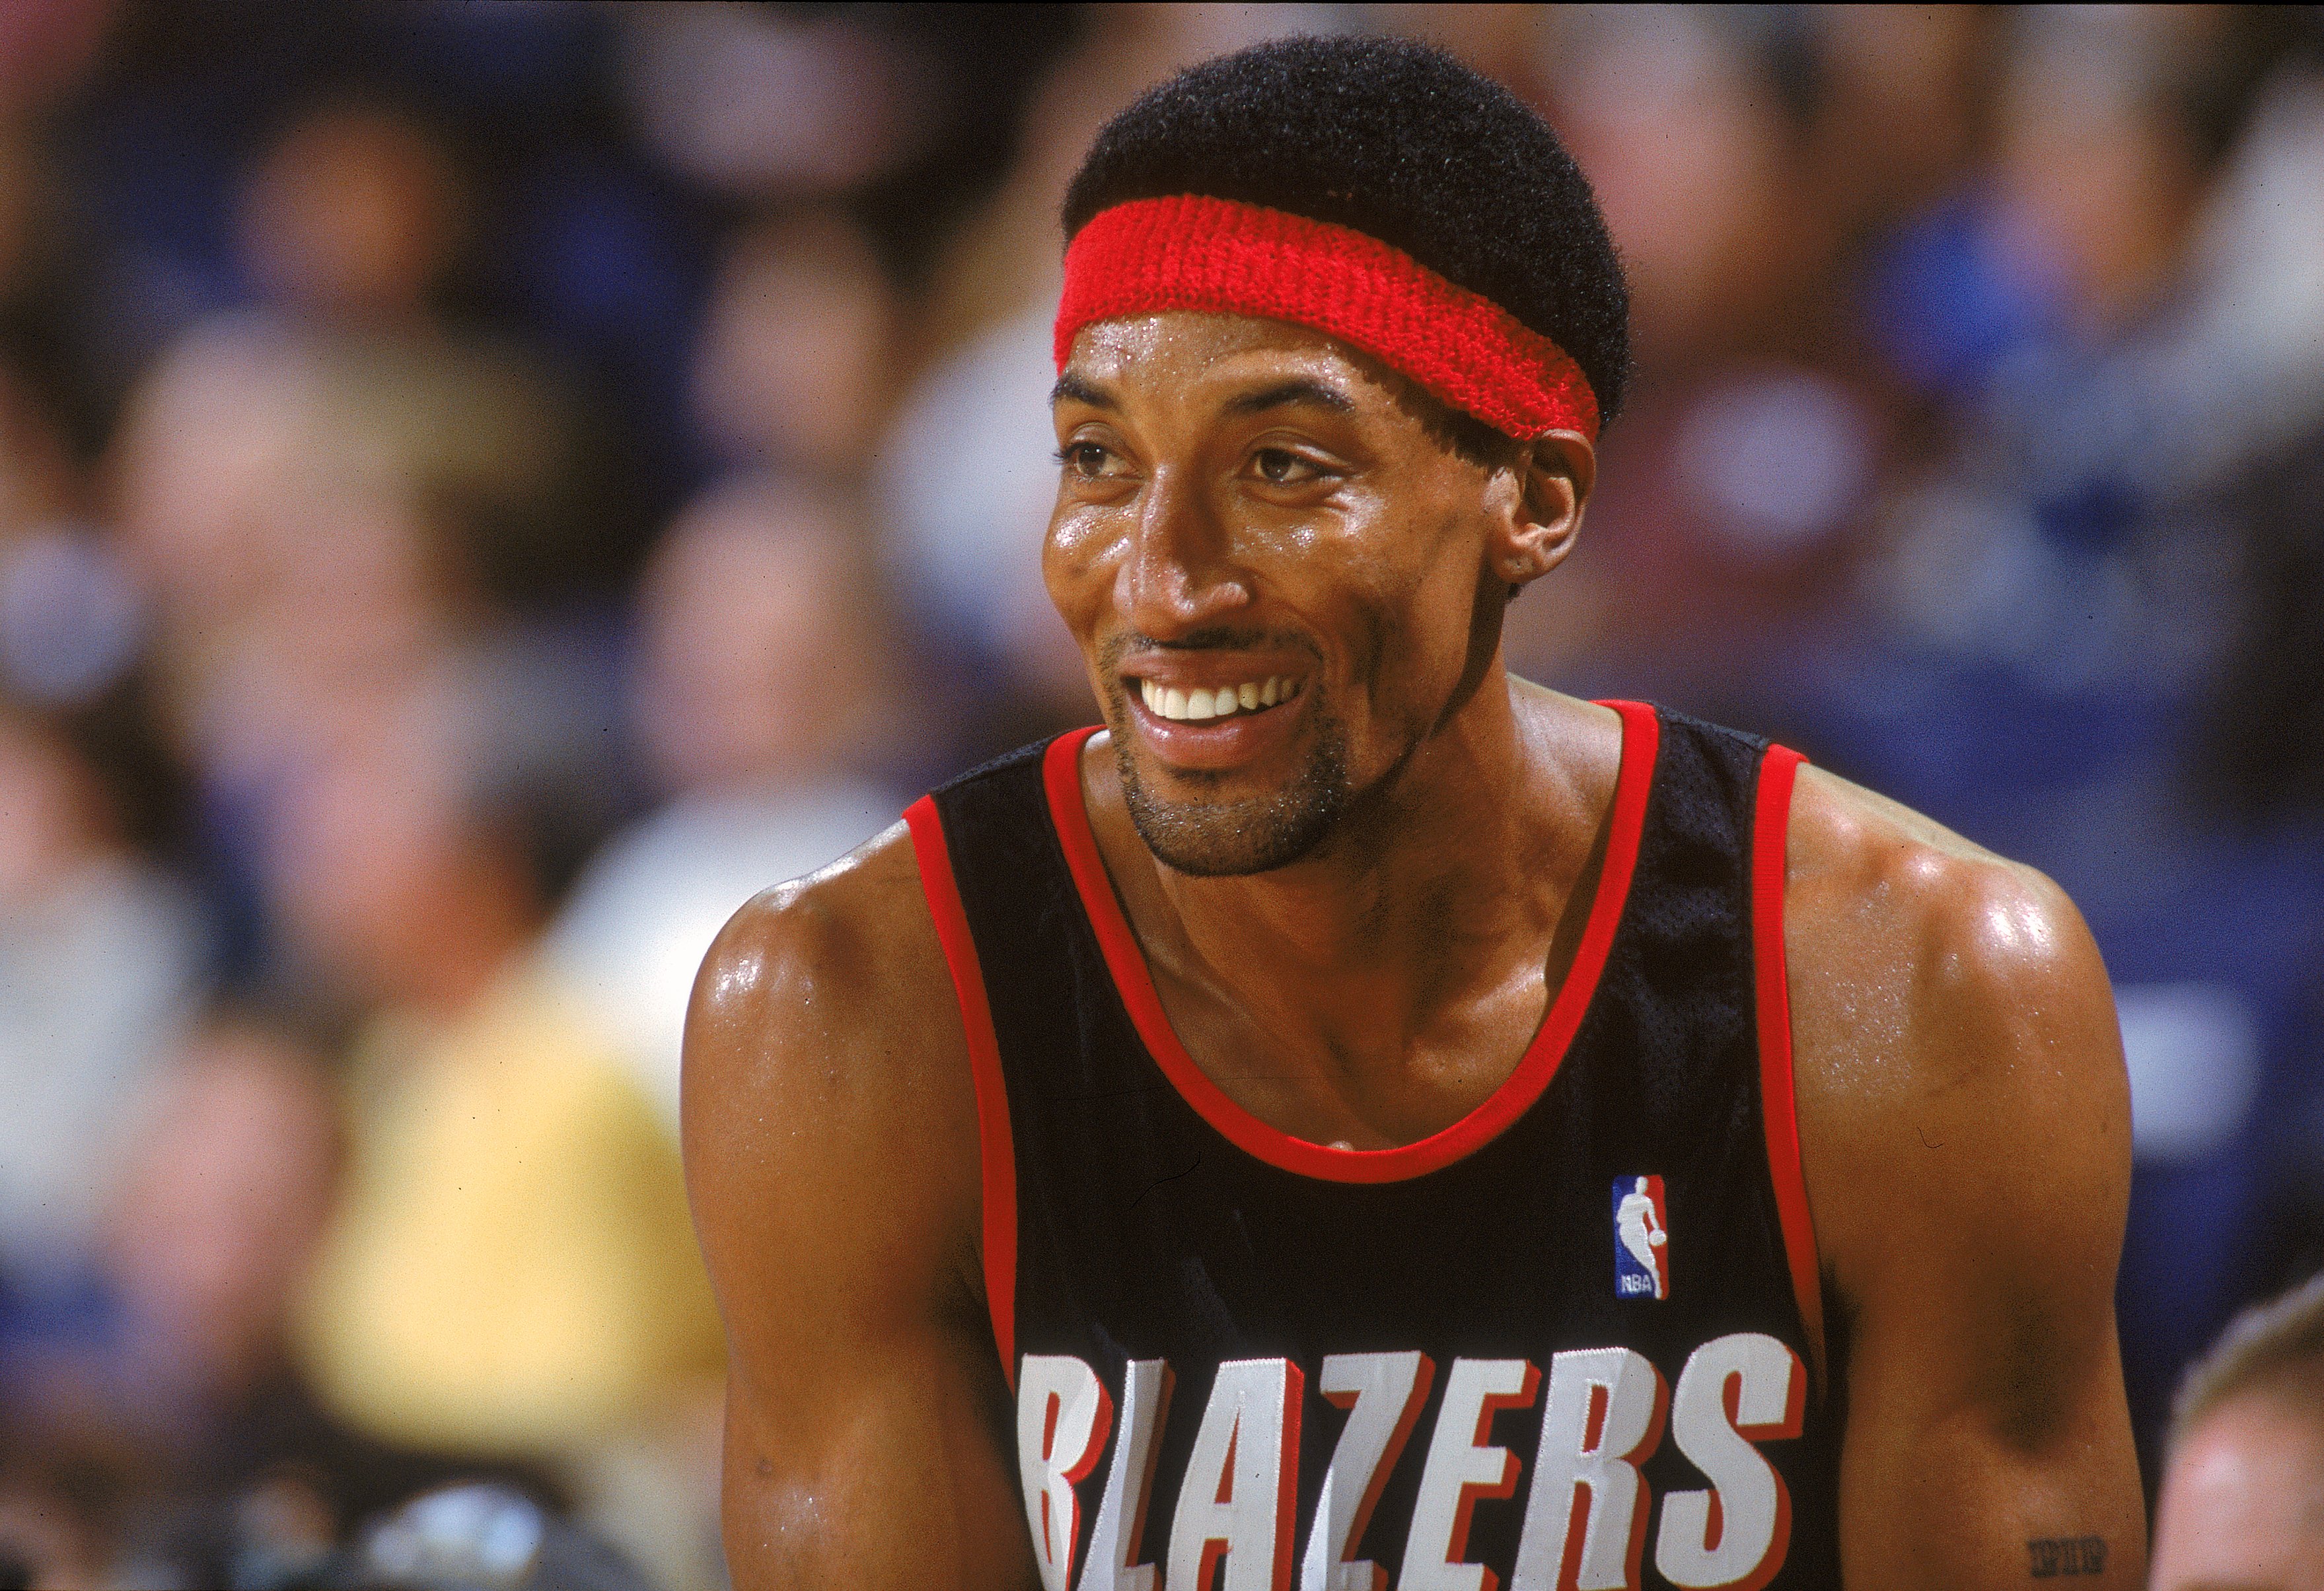 NBA legend and former Portland Trail Blazers great Scottie Pippen looks on during a game in December 2000